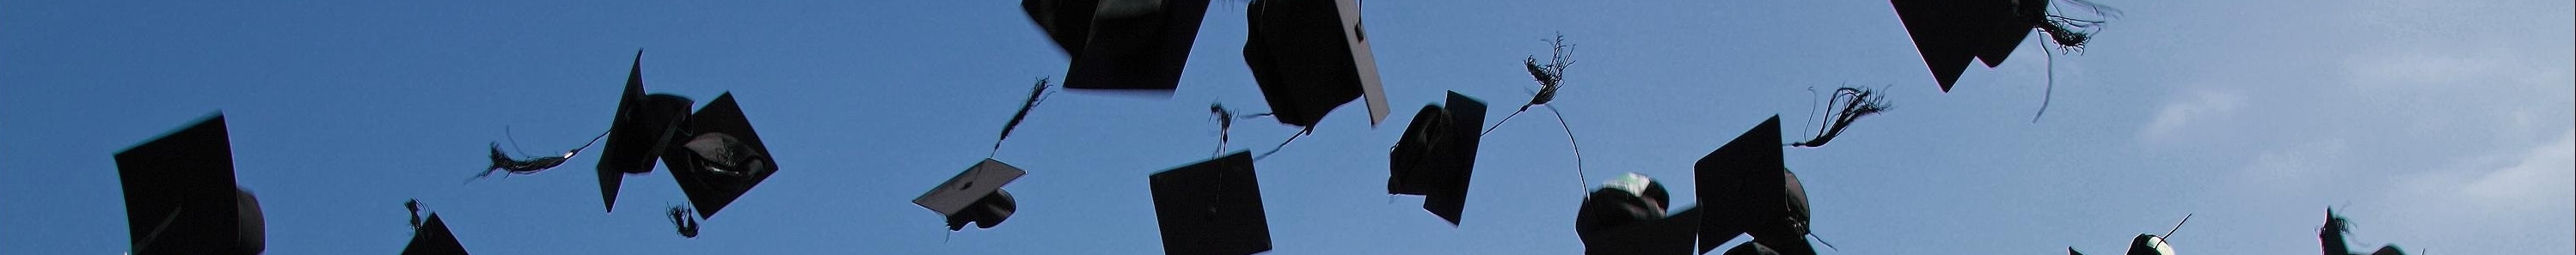 mortarboards tossed in the air